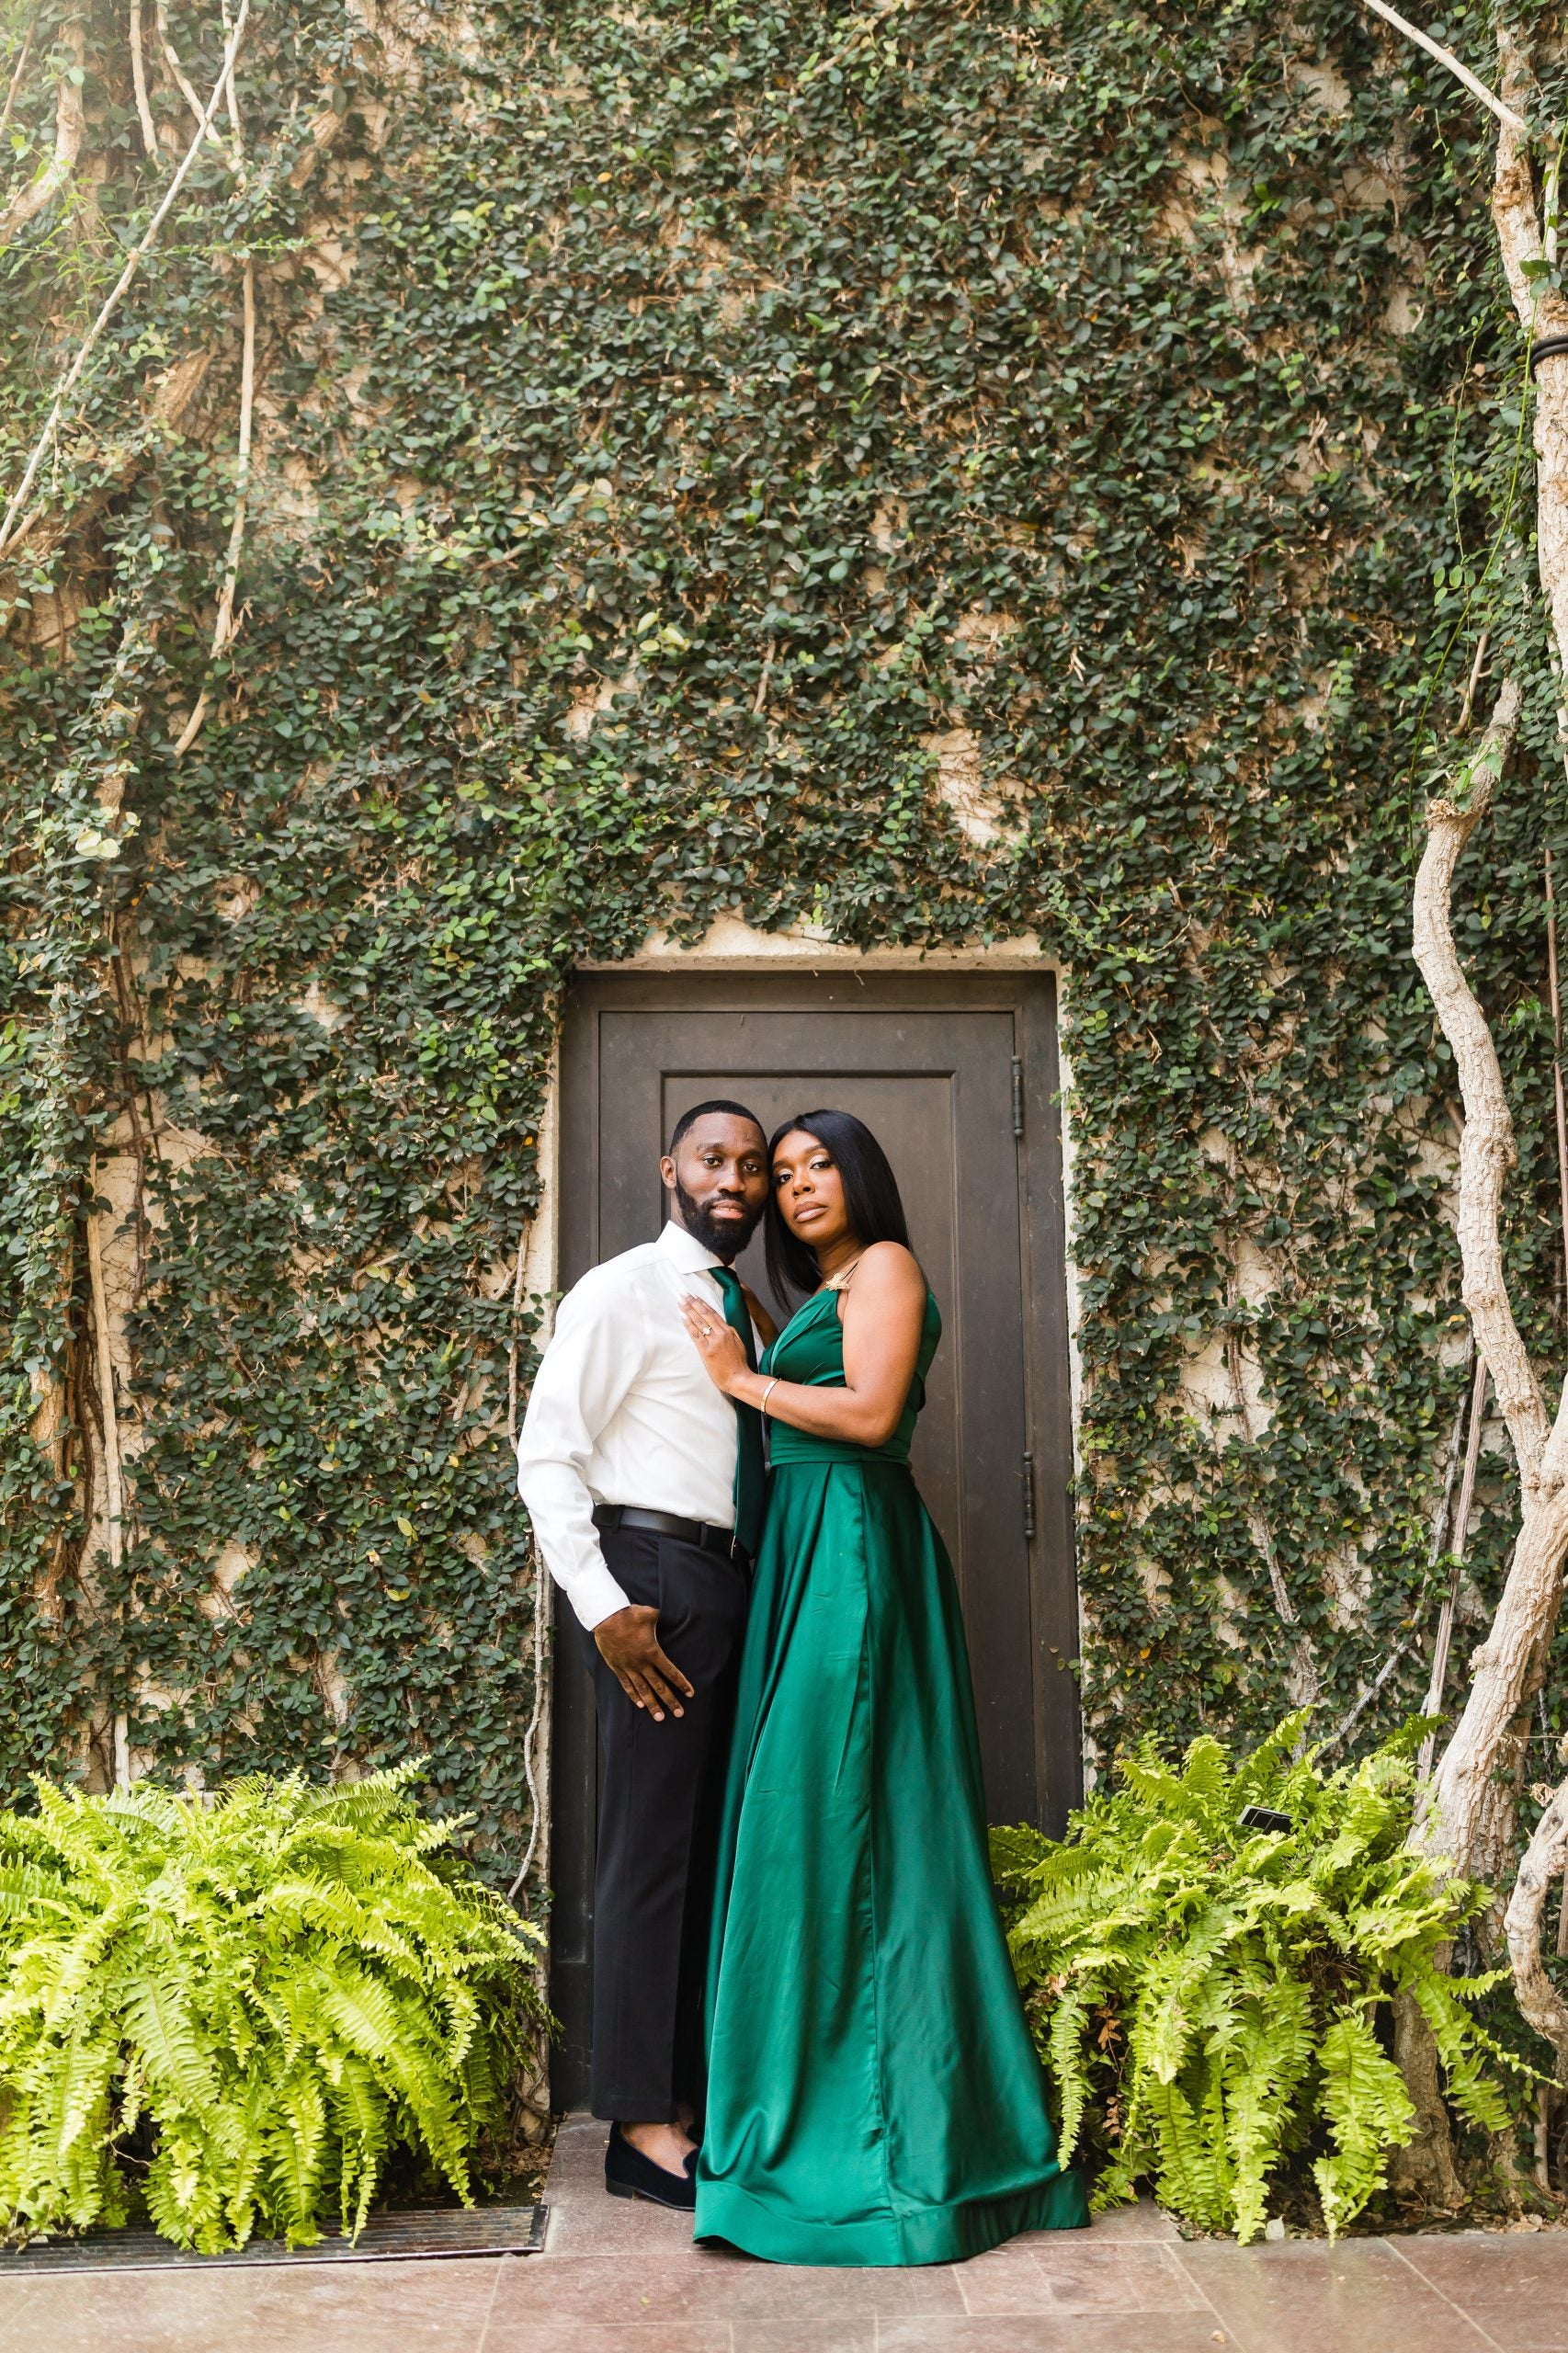 Old, New, Borrowed, Blue: This Couple's Epic Engagement Shoot Included Four Fabulous Outfit Changes